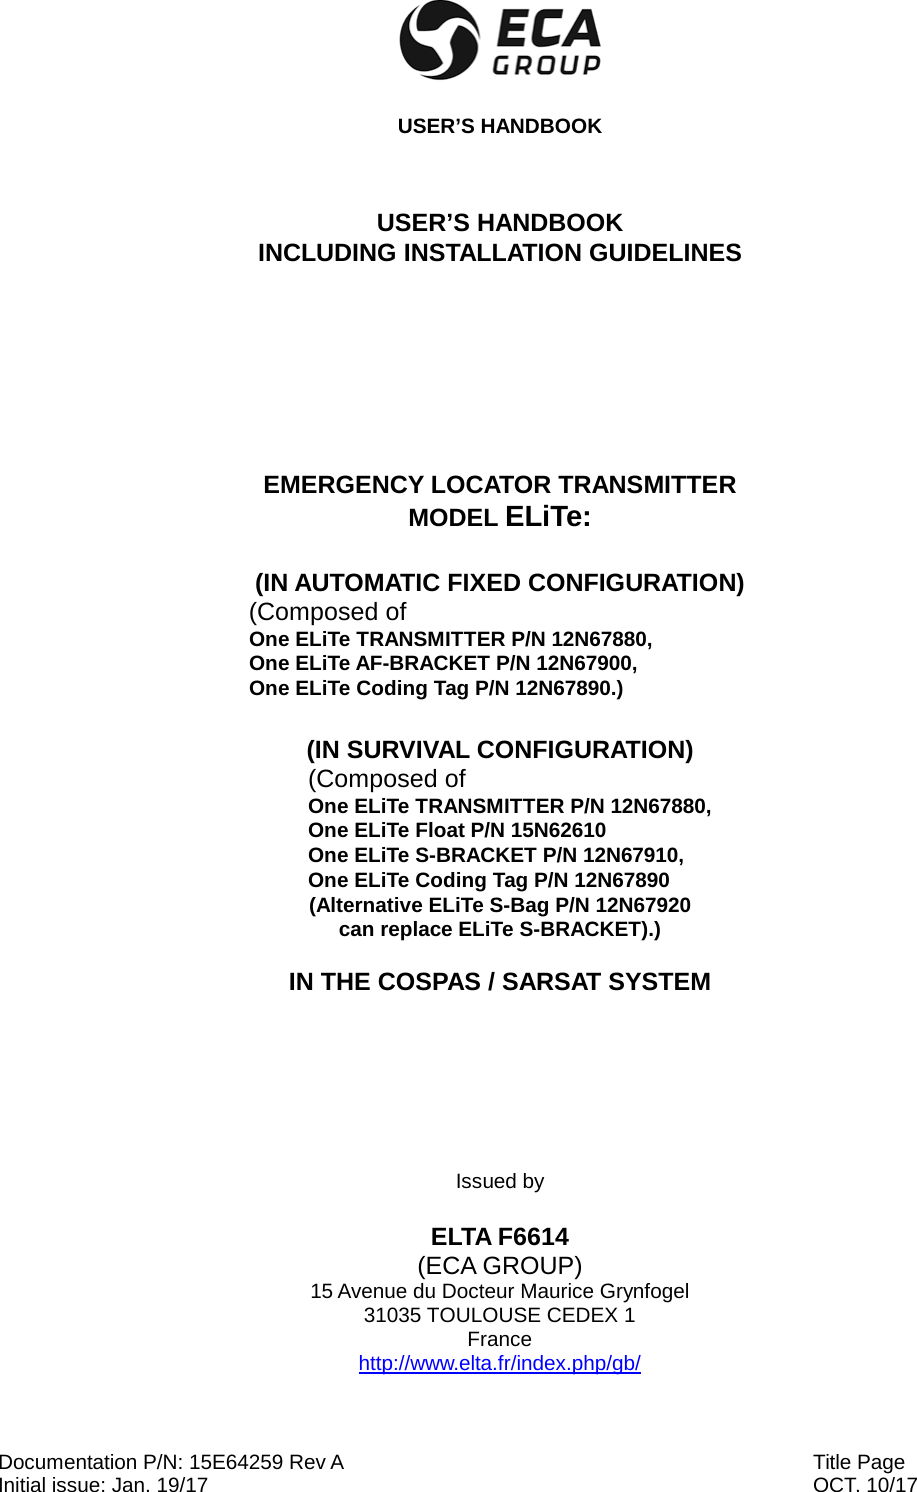  USER’S HANDBOOK Documentation P/N: 15E64259 Rev A Initial issue: Jan. 19/17  Title Page   OCT. 10/17  USER’S HANDBOOK INCLUDING INSTALLATION GUIDELINES    EMERGENCY LOCATOR TRANSMITTER MODEL ELiTe:  (IN AUTOMATIC FIXED CONFIGURATION) (Composed of  One ELiTe TRANSMITTER P/N 12N67880,  One ELiTe AF-BRACKET P/N 12N67900, One ELiTe Coding Tag P/N 12N67890.)  (IN SURVIVAL CONFIGURATION) (Composed of  One ELiTe TRANSMITTER P/N 12N67880,  One ELiTe Float P/N 15N62610 One ELiTe S-BRACKET P/N 12N67910, One ELiTe Coding Tag P/N 12N67890 (Alternative ELiTe S-Bag P/N 12N67920  can replace ELiTe S-BRACKET).)  IN THE COSPAS / SARSAT SYSTEM   Issued by  ELTA F6614 (ECA GROUP) 15 Avenue du Docteur Maurice Grynfogel 31035 TOULOUSE CEDEX 1 France http://www.elta.fr/index.php/gb/ 